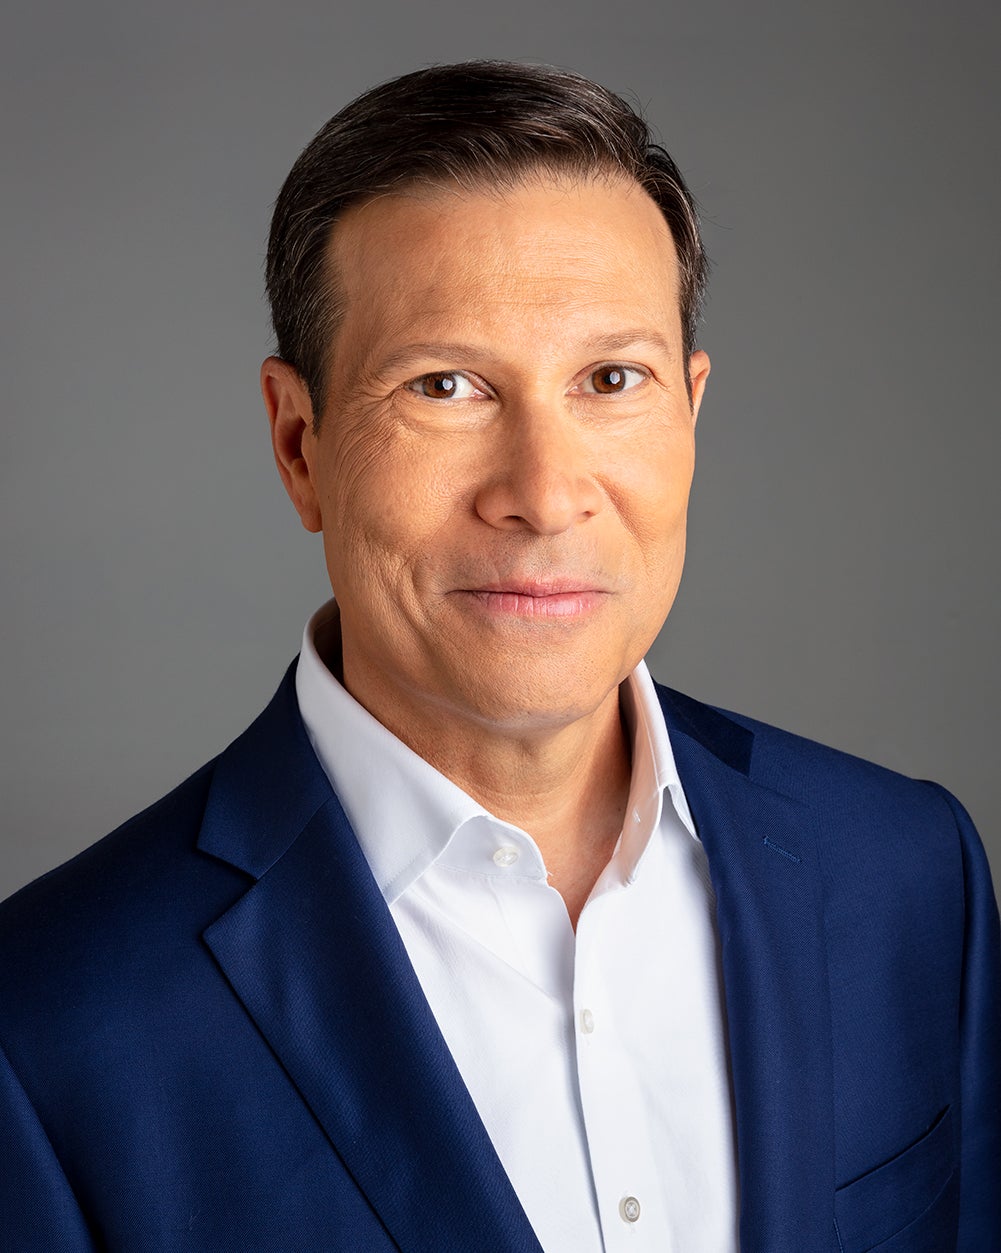 Frank Figliuzzi said his research revealed truckers’ jobs allow them to ‘grab a victim in one jurisdiction, kill them in a second jurisdiction, dump their body in a third jurisdiction – and be on their way before anyone has figured anything out’